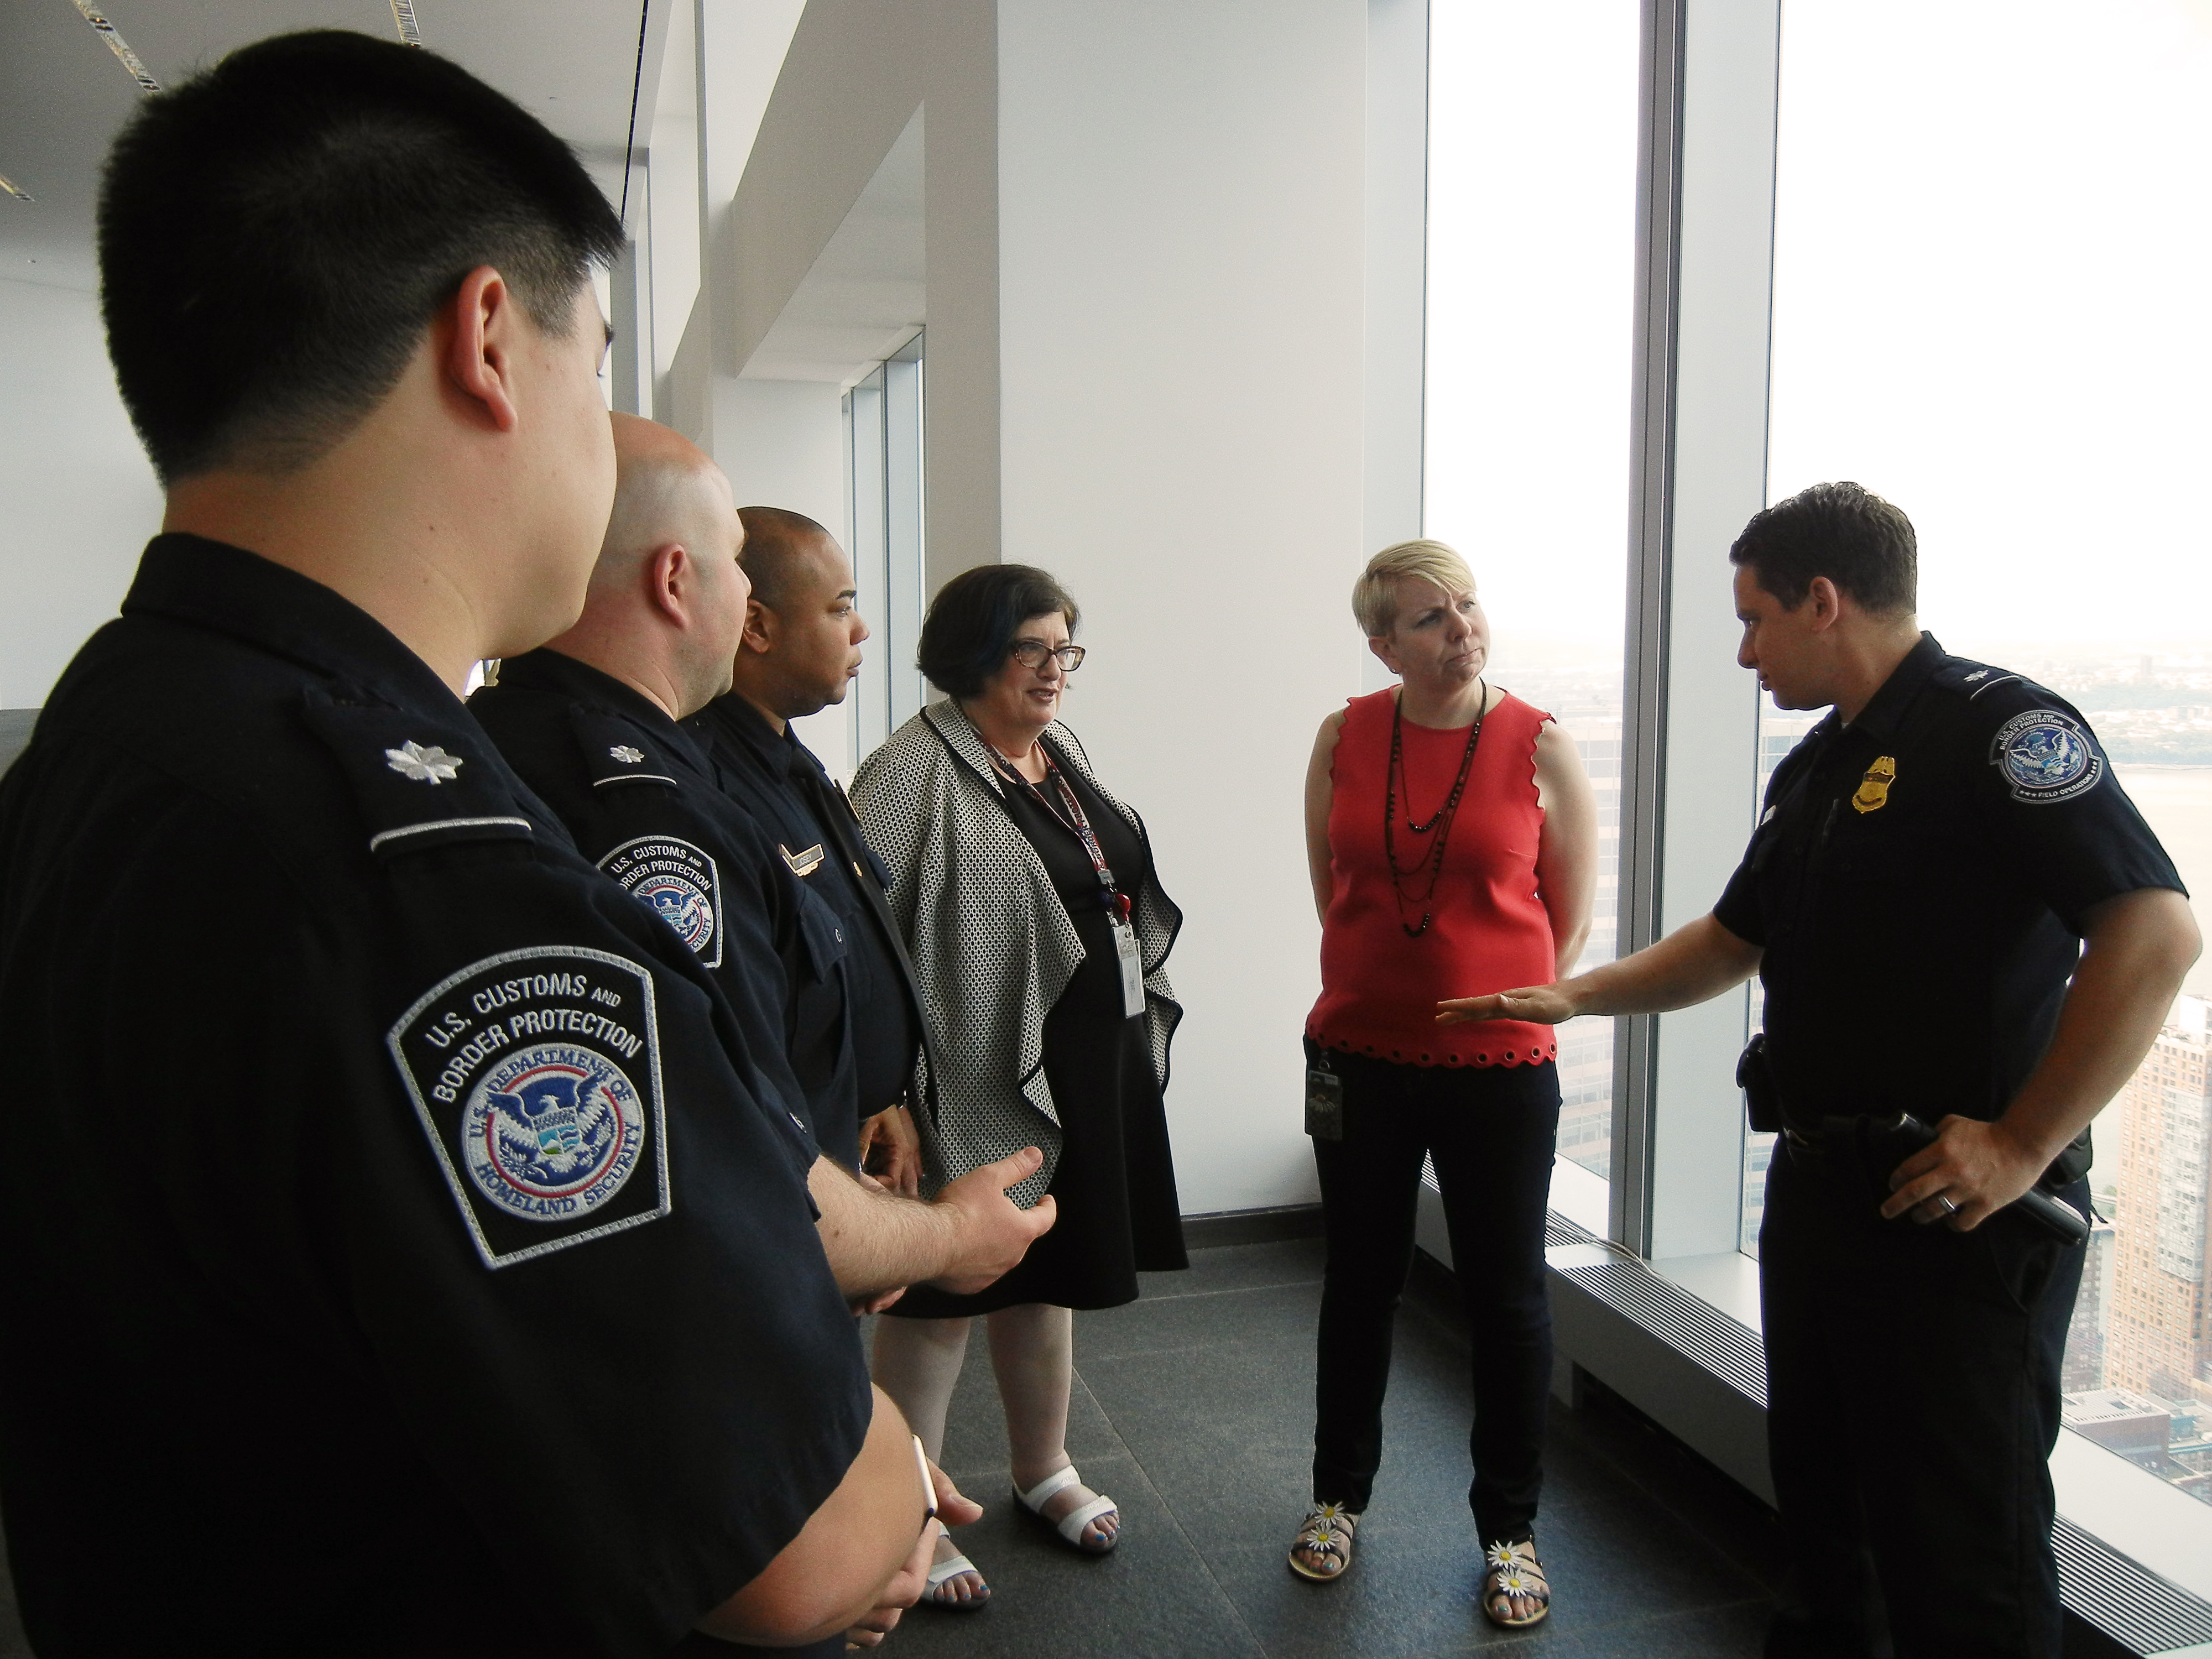 CBP employees discuss agency operations